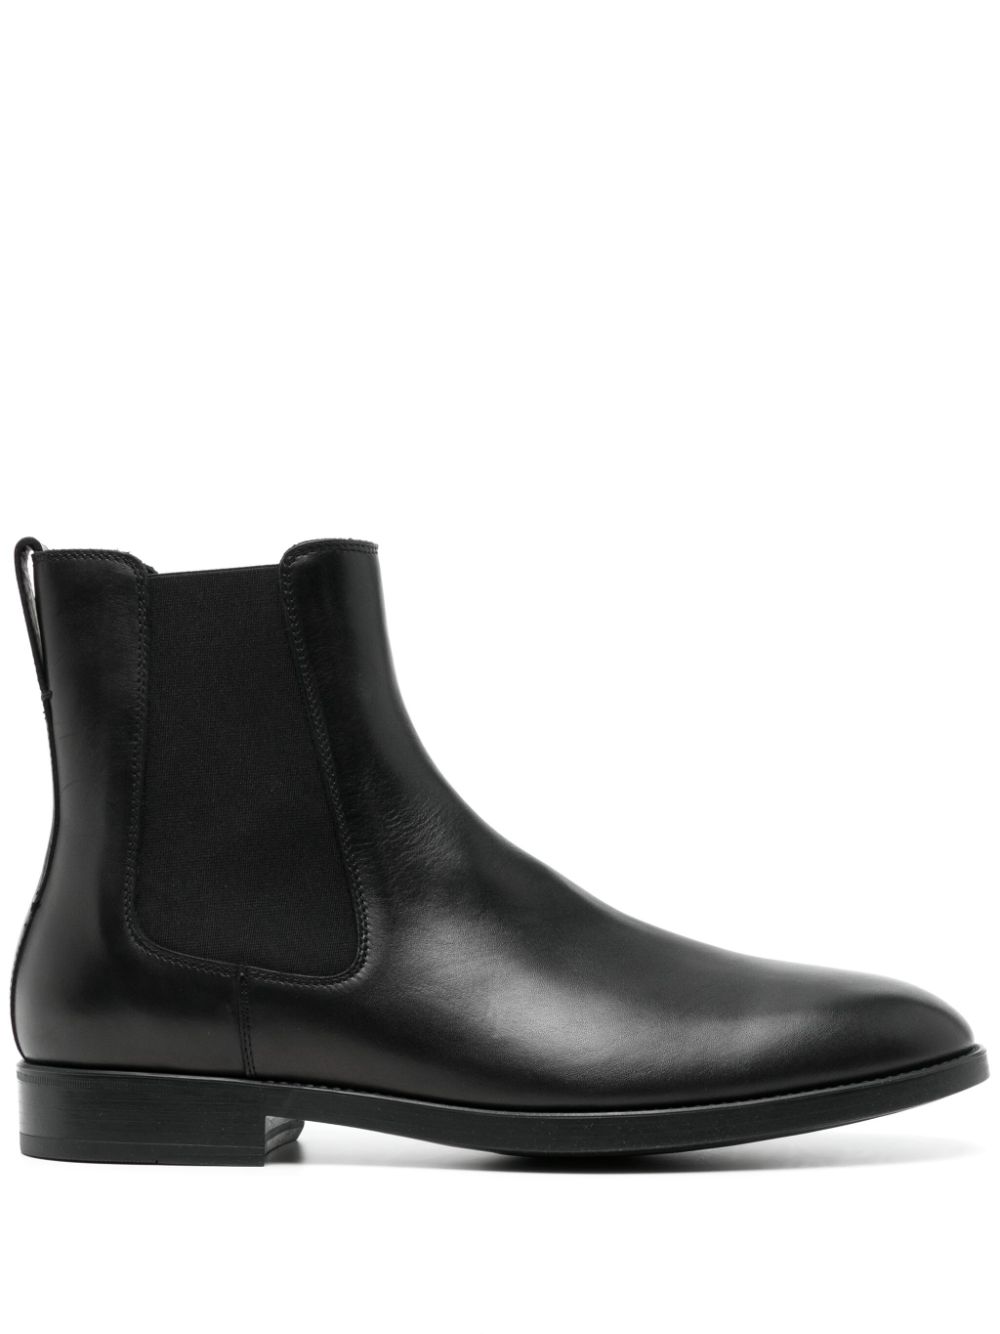 TOM FORD Robert leather Chelsea boots - Black von TOM FORD